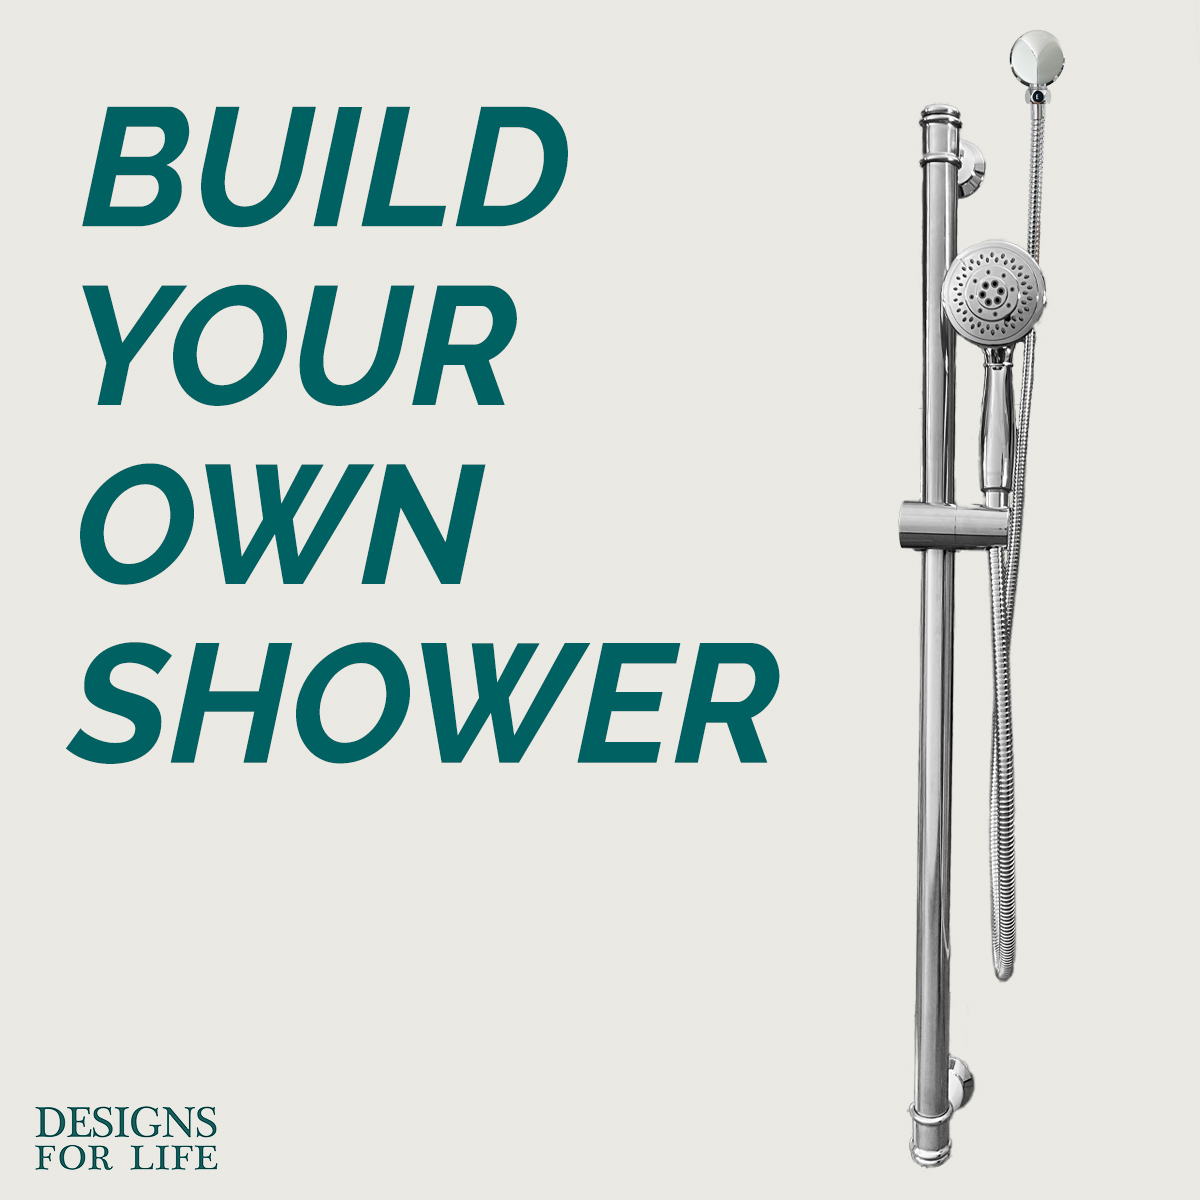 Build your own shower